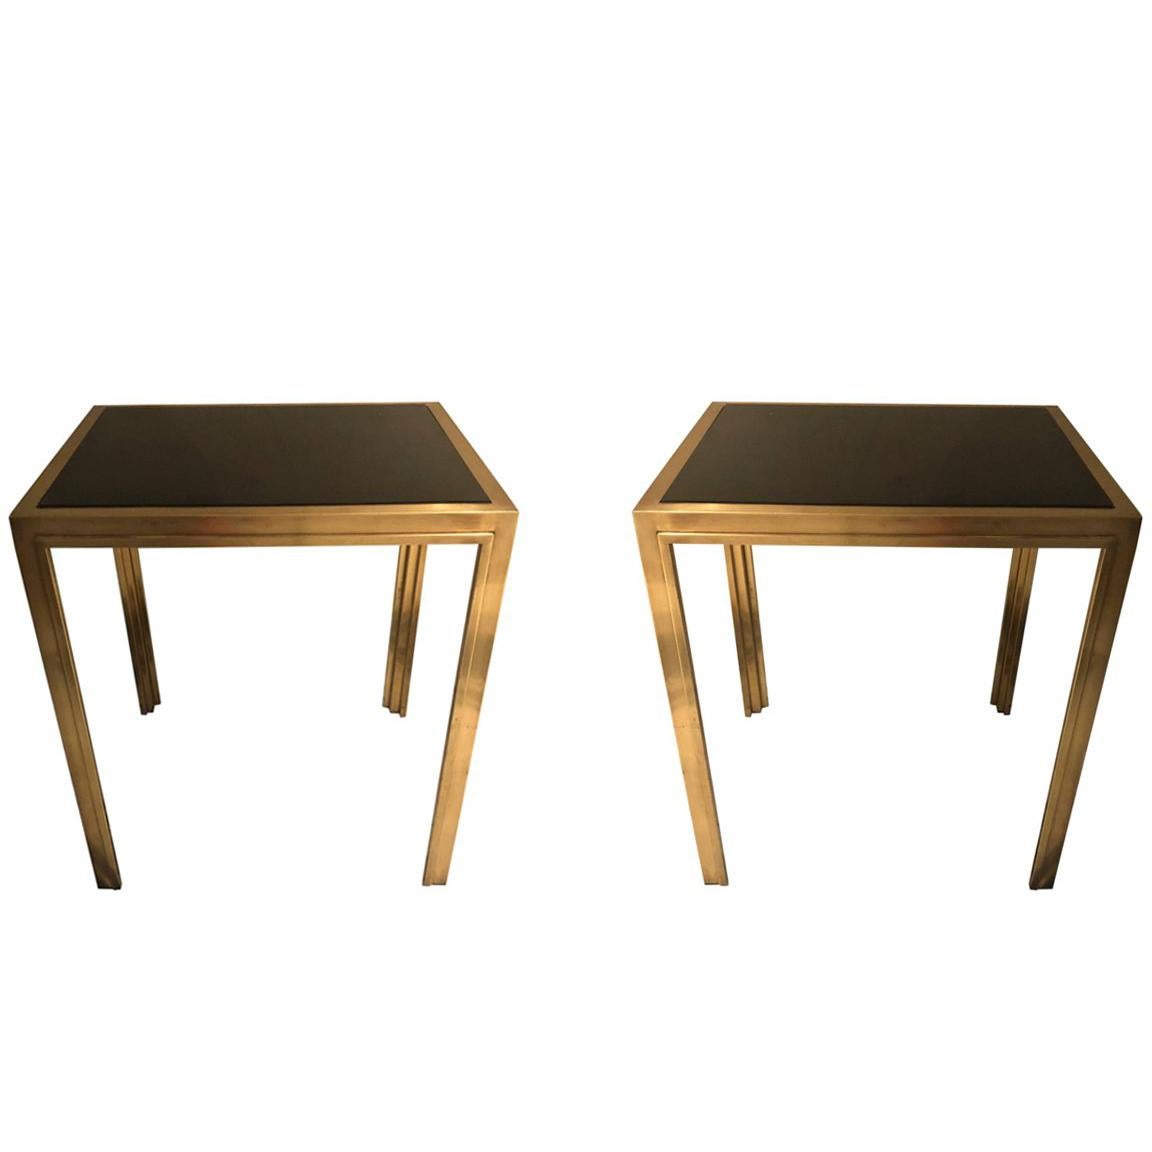 A Vintage Pair of French Deco Side Tables, circa 1935